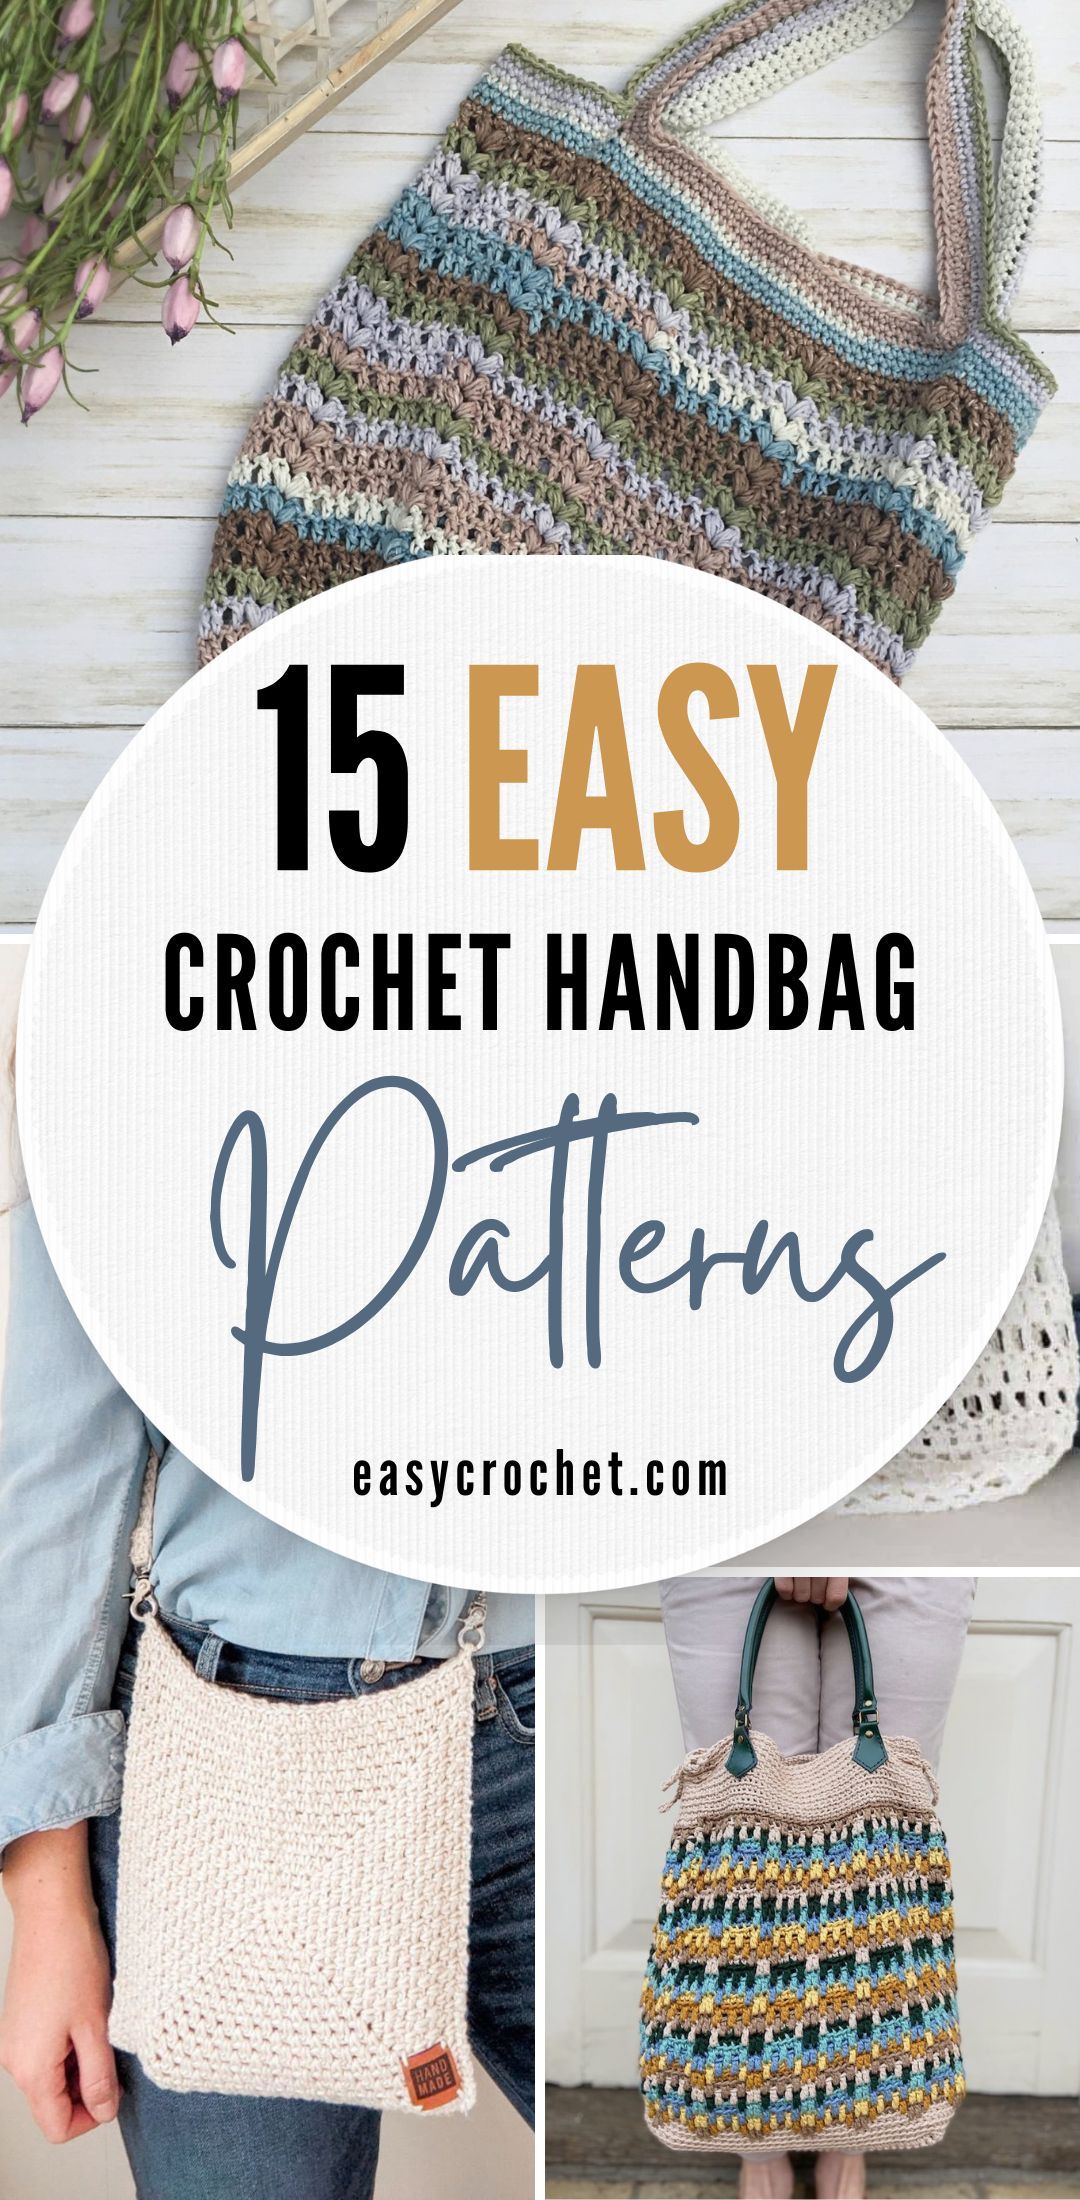 An easy crochet round bag: The Pink Hexy Bag pattern post - Mirrymas Crafts